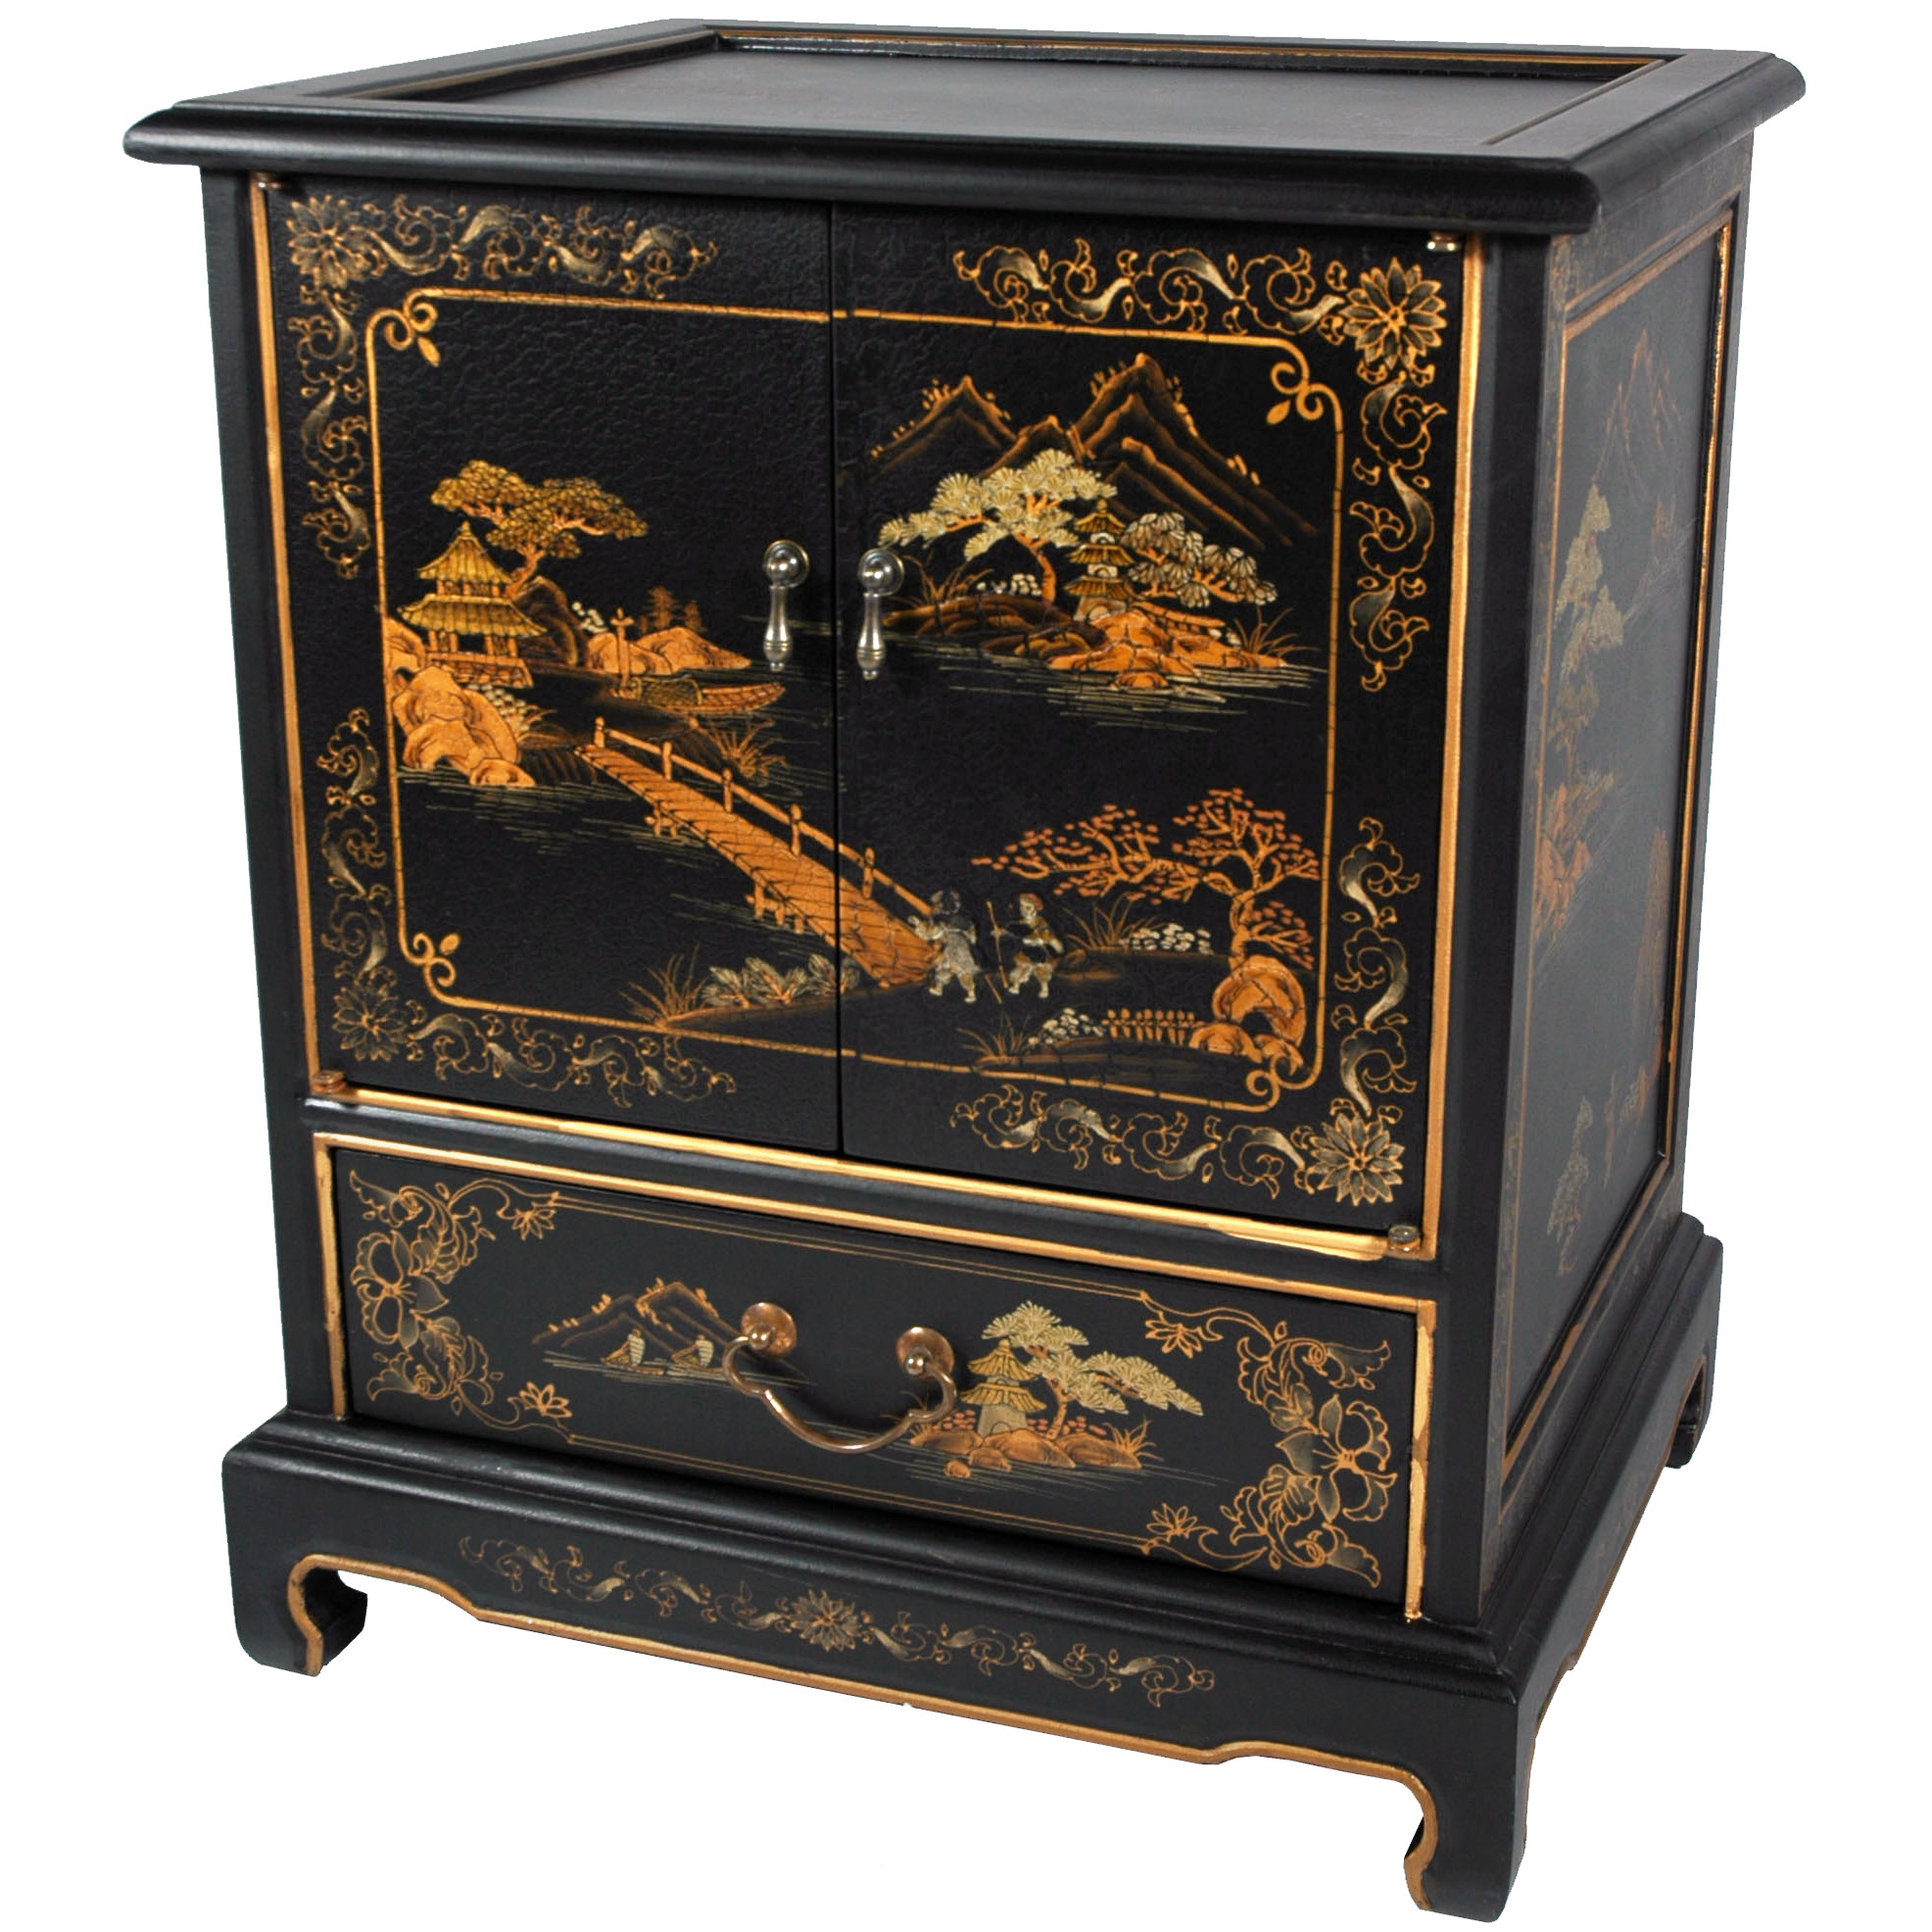 Buy Japanese End Table Online LCQ ETB Satisfaction 